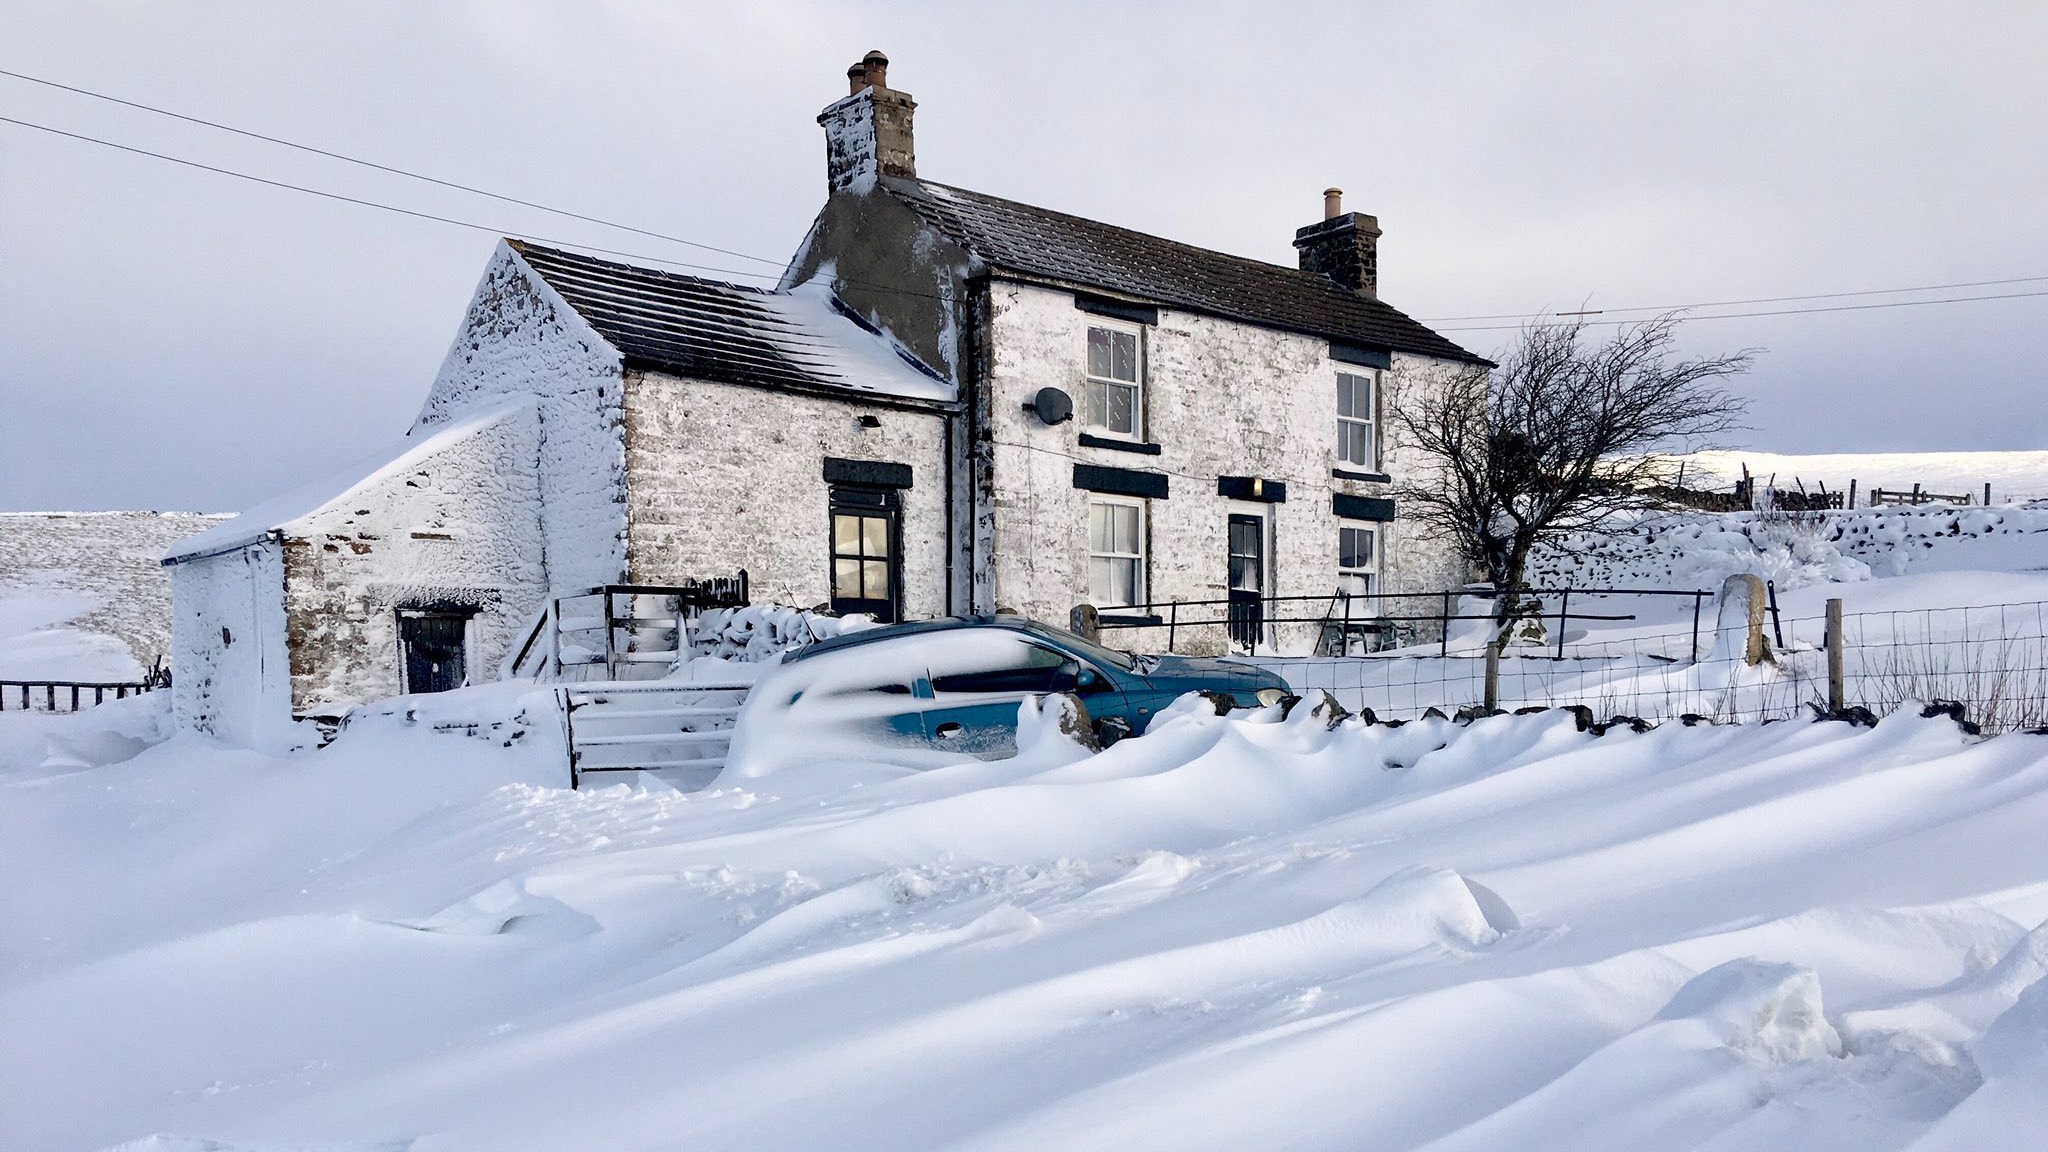 In Pictures: UK shivers amid snow and ice | ITV News